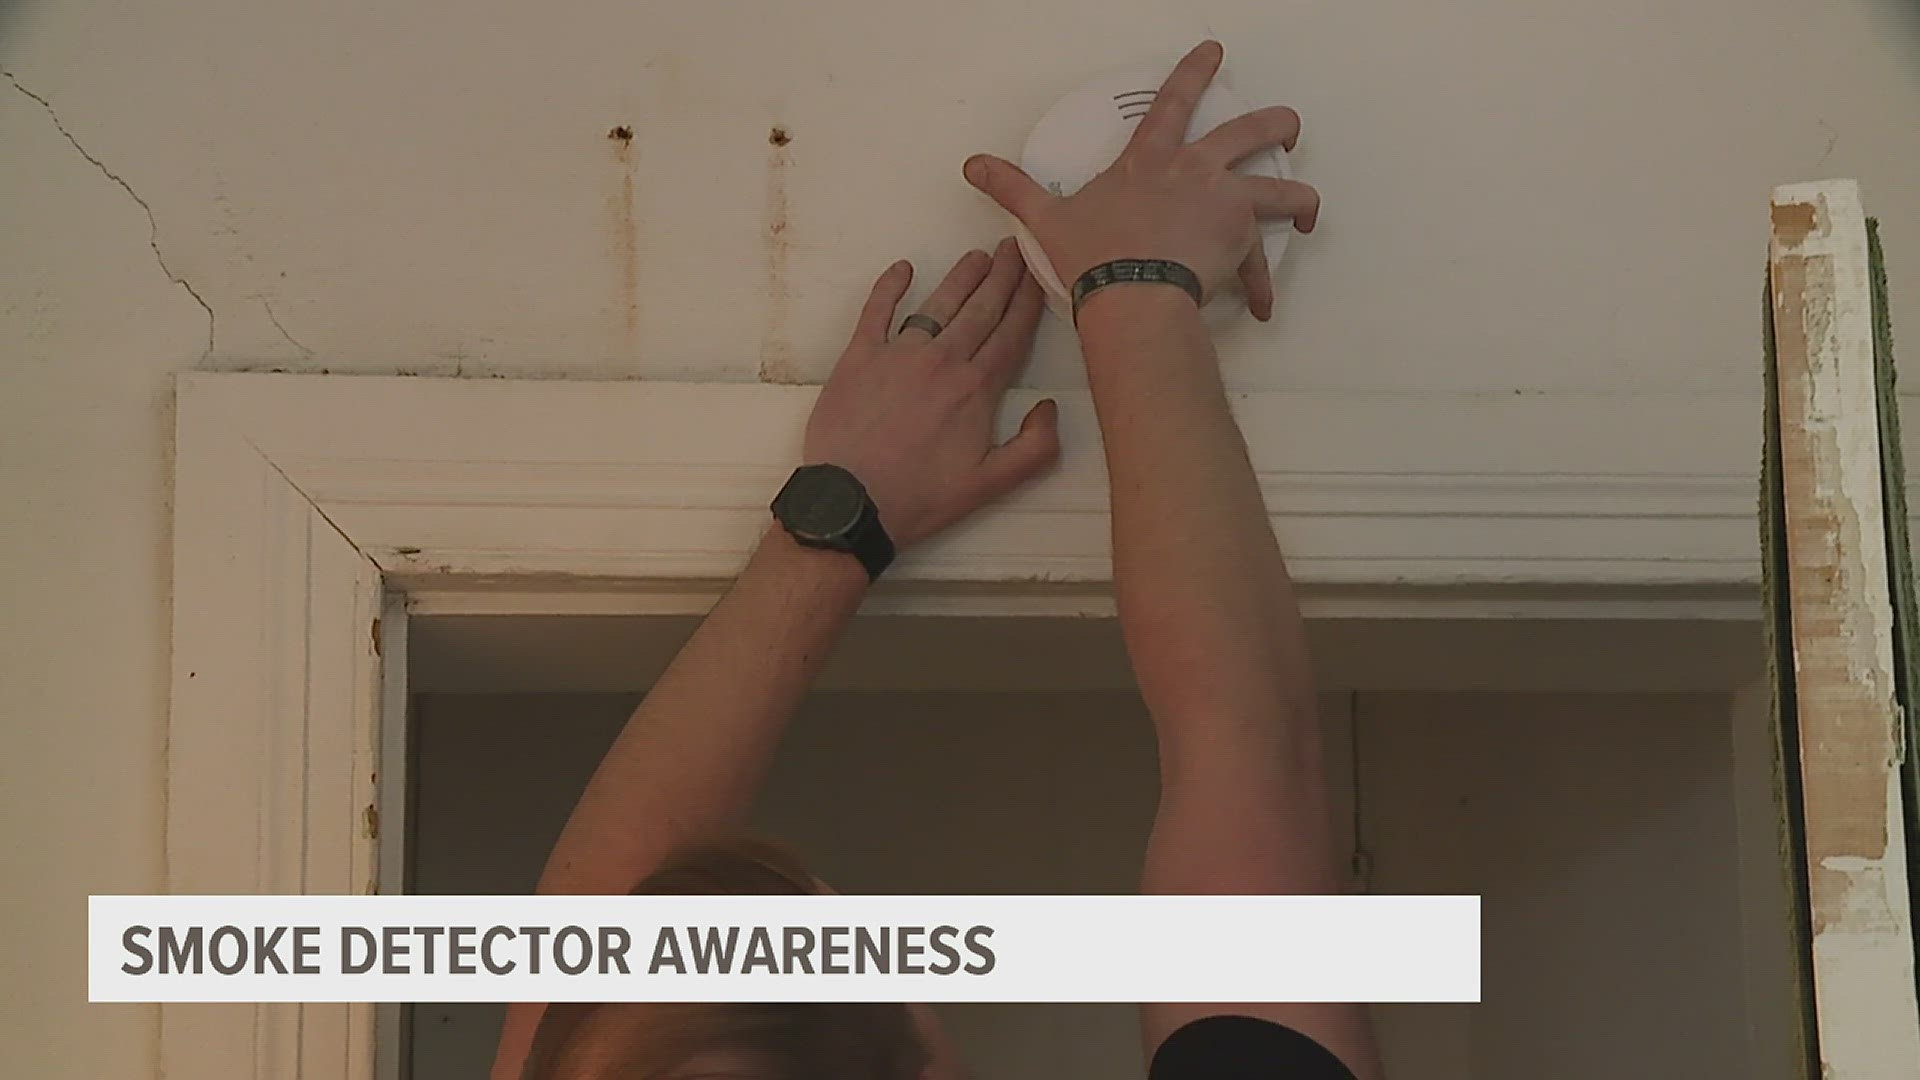 The goal of the installation was to raise awareness about the Red Cross program that offers free smoke alarms and installation, officials said.